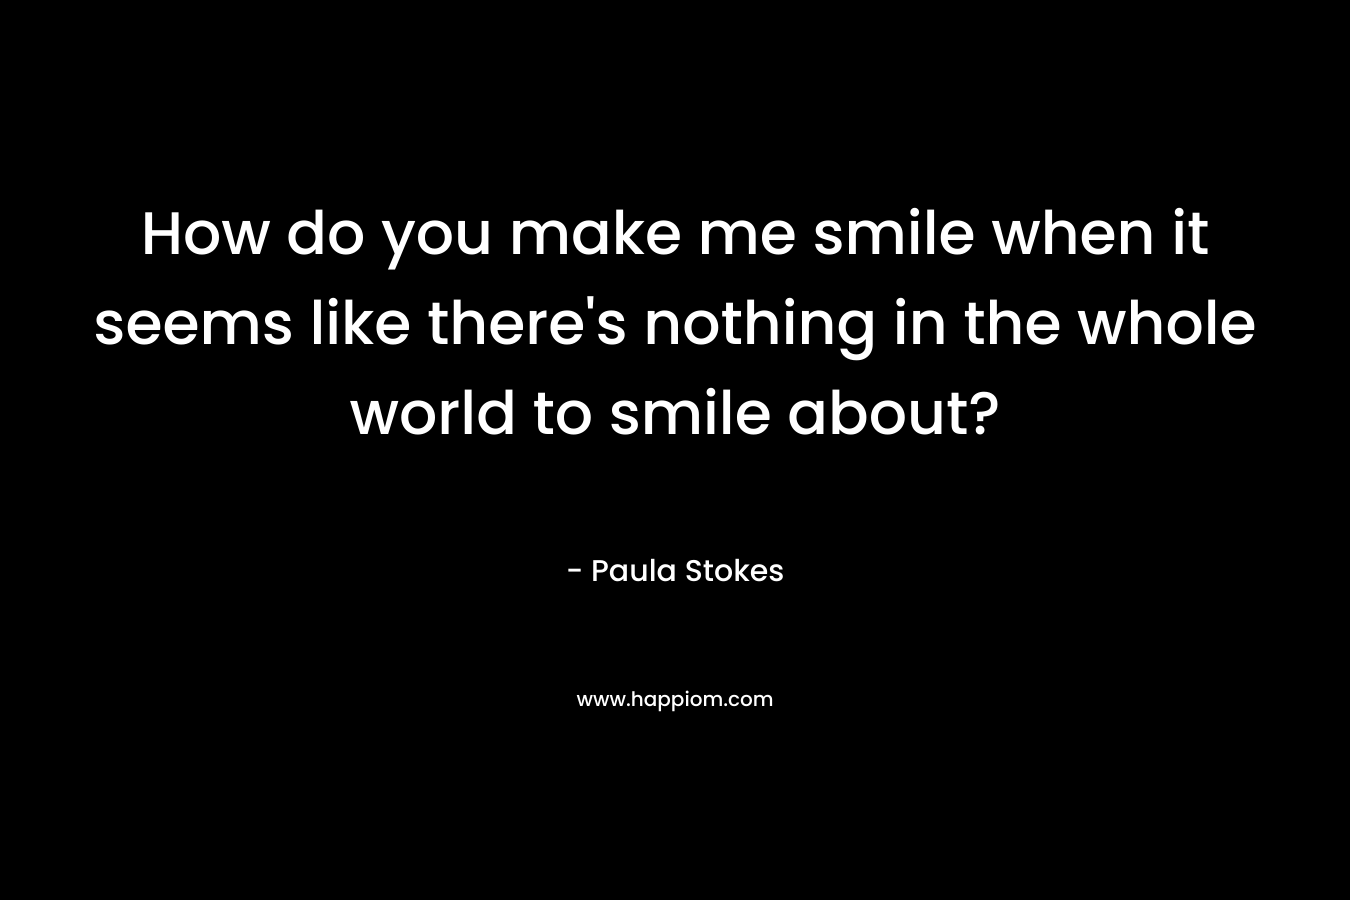 How do you make me smile when it seems like there’s nothing in the whole world to smile about? – Paula Stokes